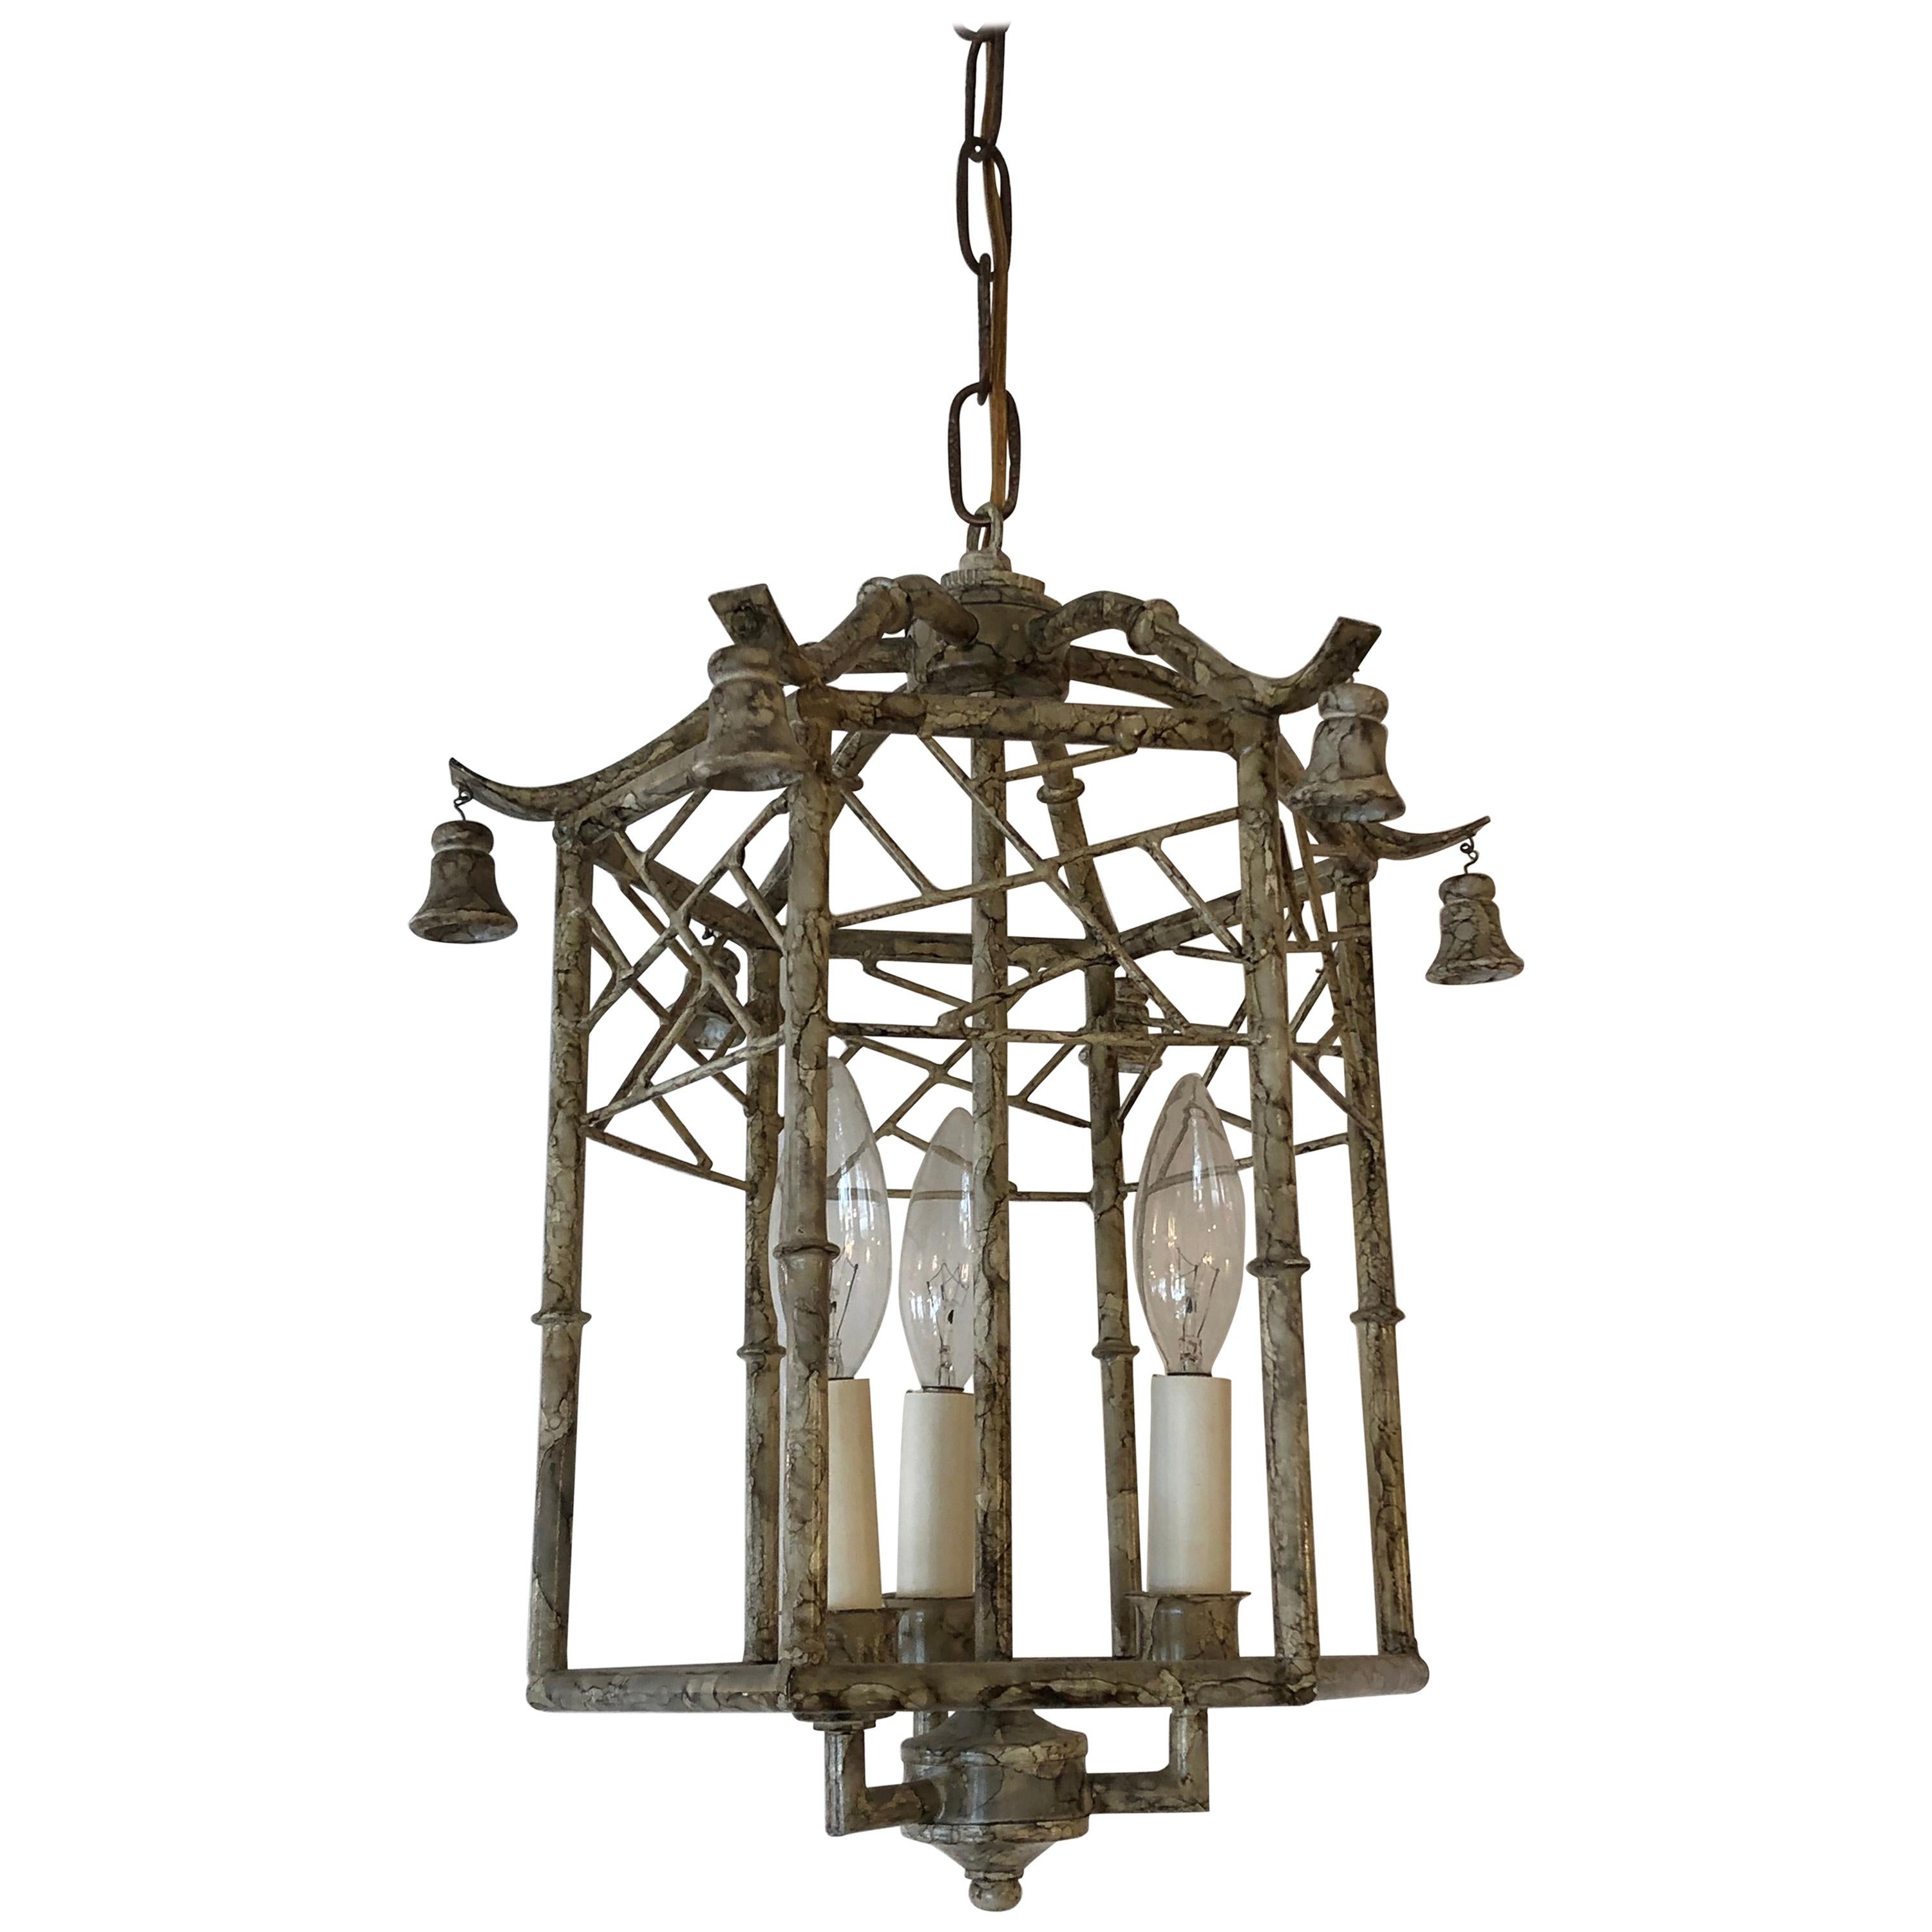 Stylish Pagoda Style Iron and Tole Lantern Pendant Chandelier For Sale